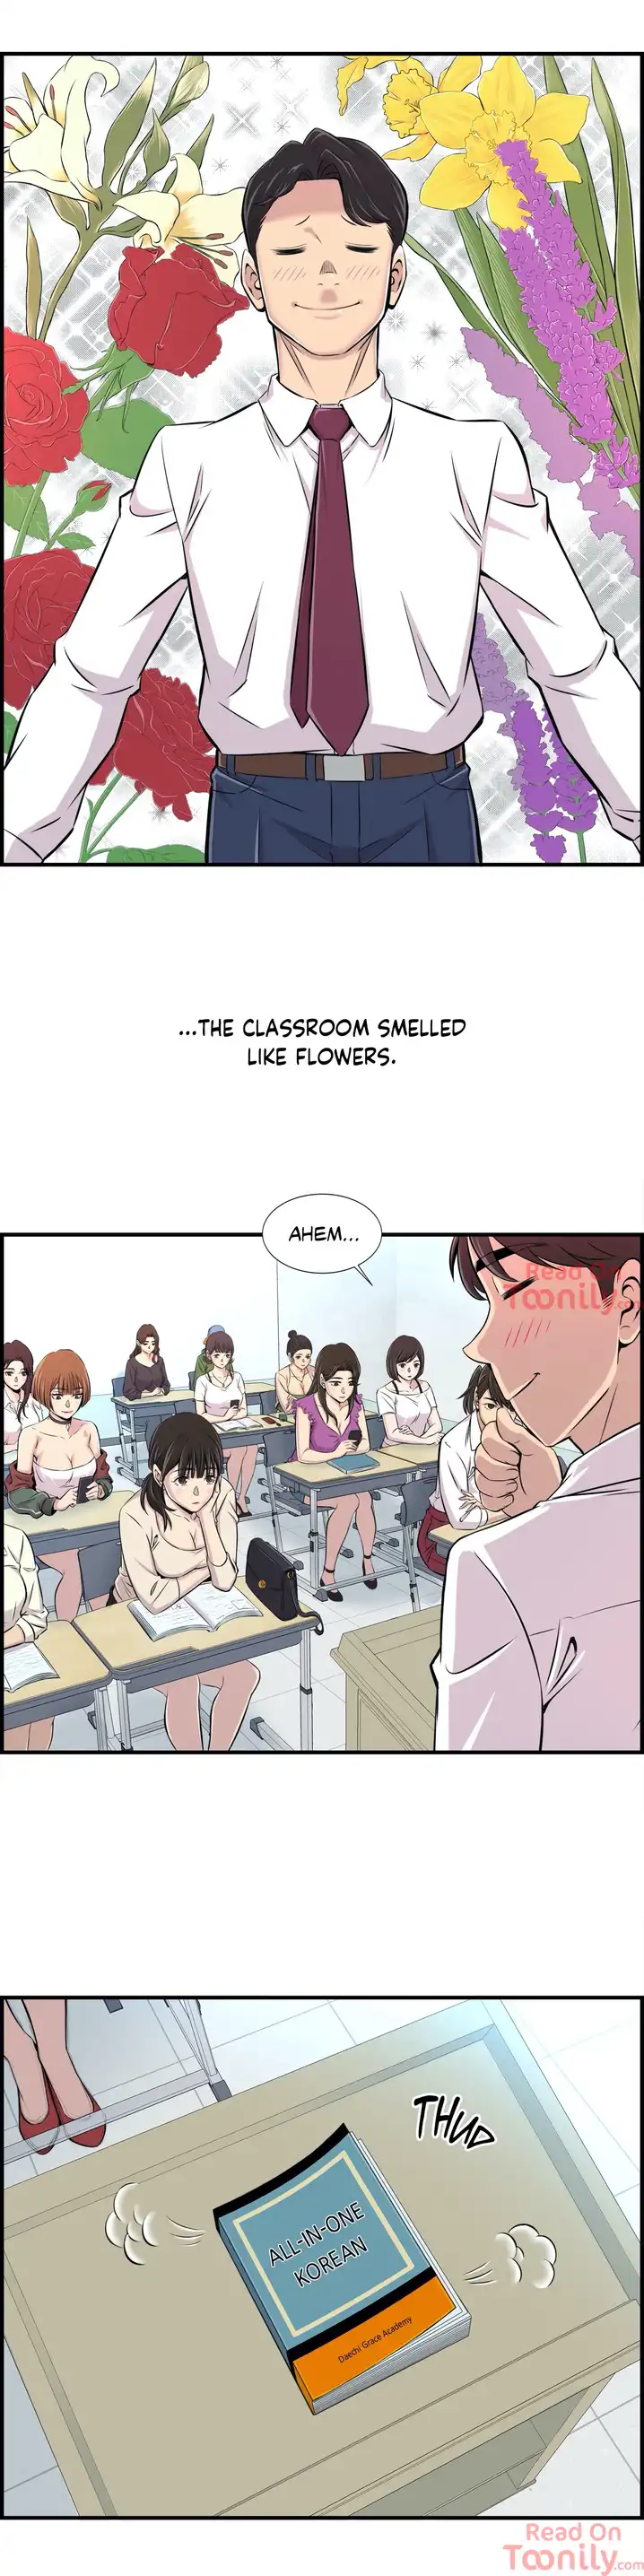 Cram School Scandal - Chapter 1 Page 28